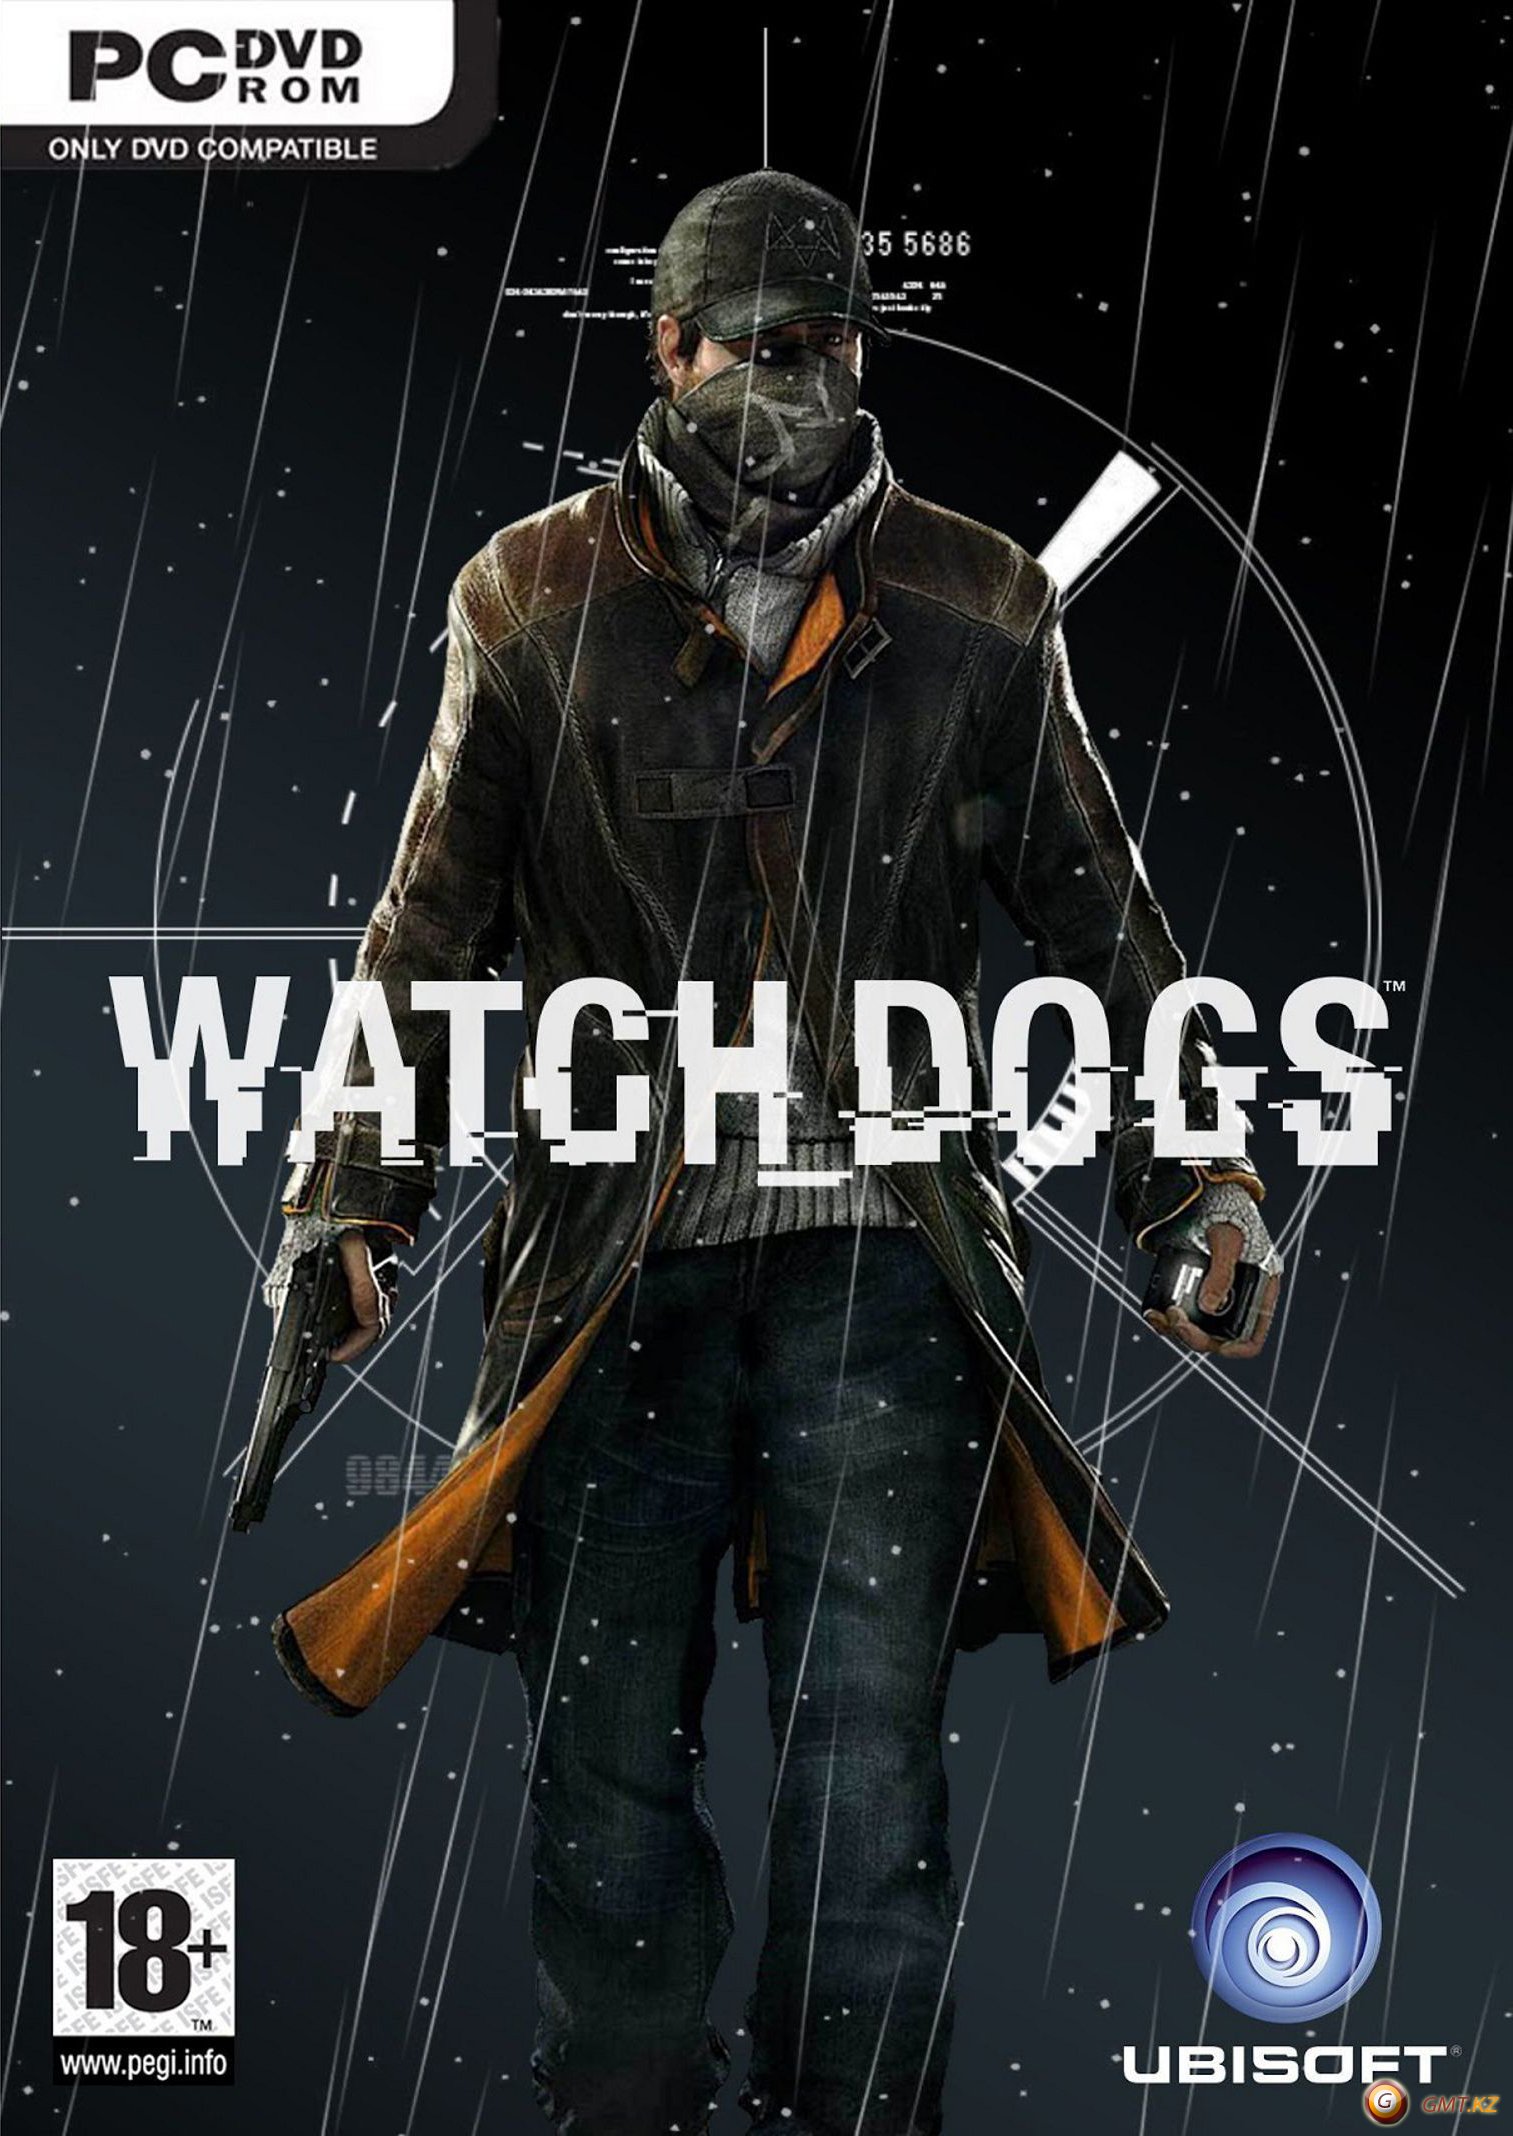 Is watch dogs on steam фото 28